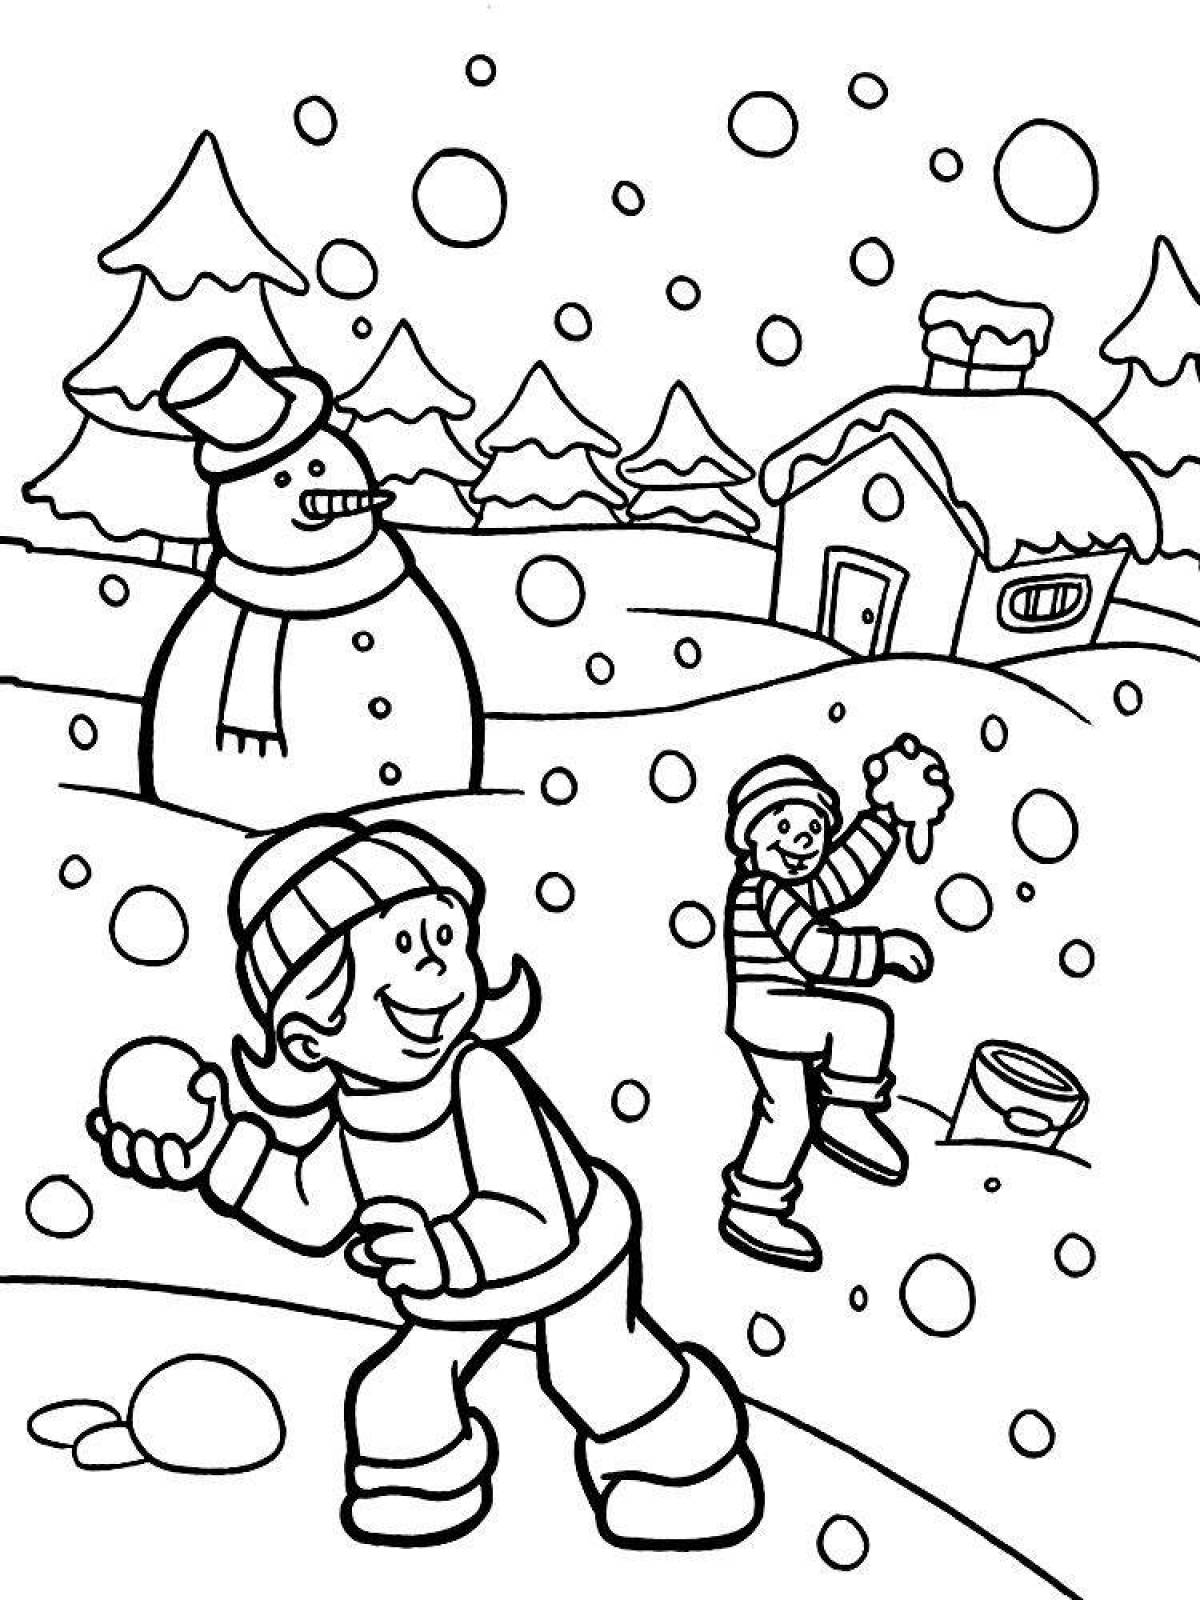 Chic winter coloring book